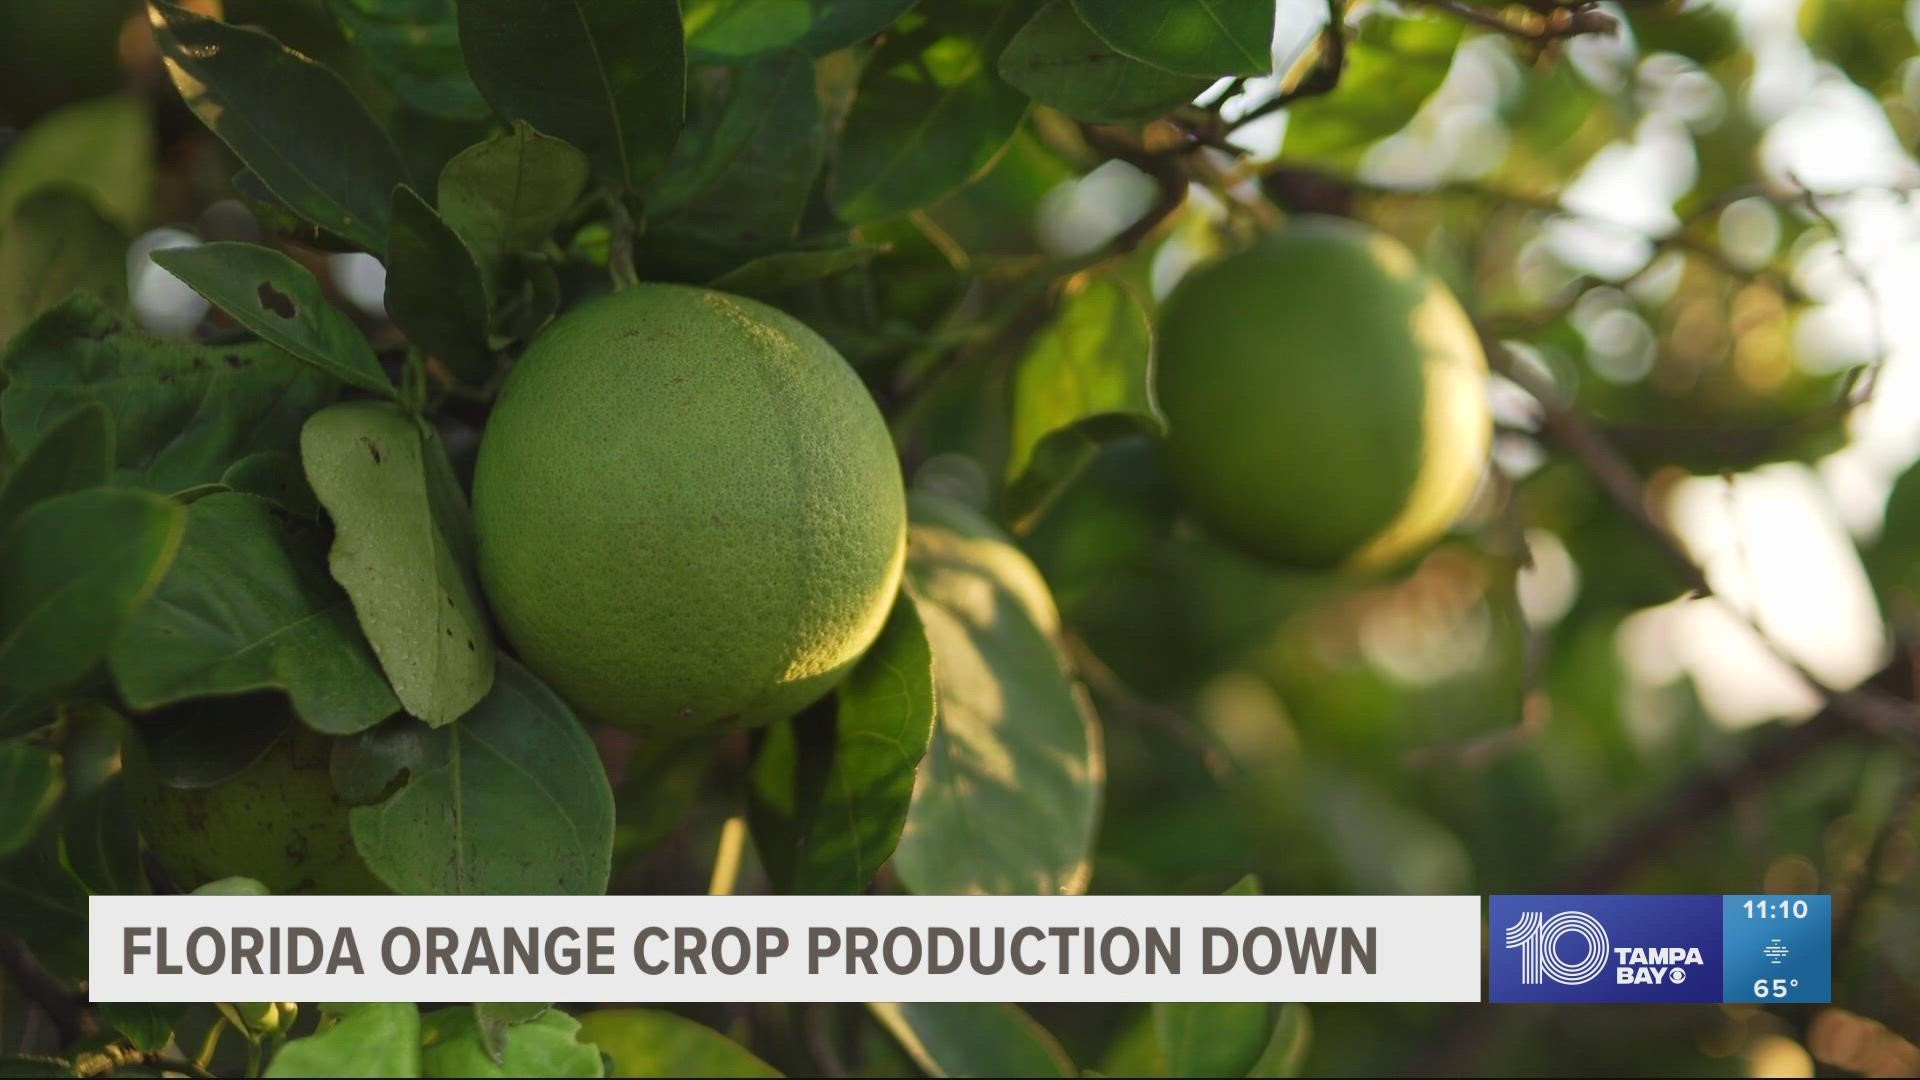 The decline in orange production would make the 2022-23 season one of the lowest since World War II.